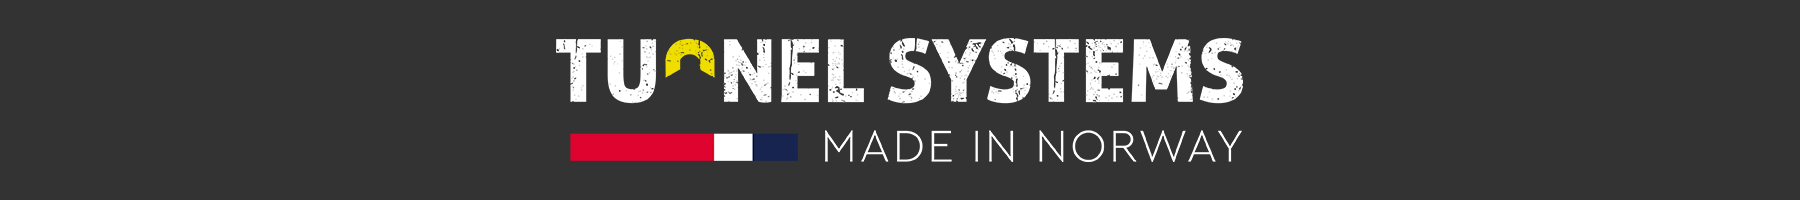 Tunnel Systems - made in Norway logo